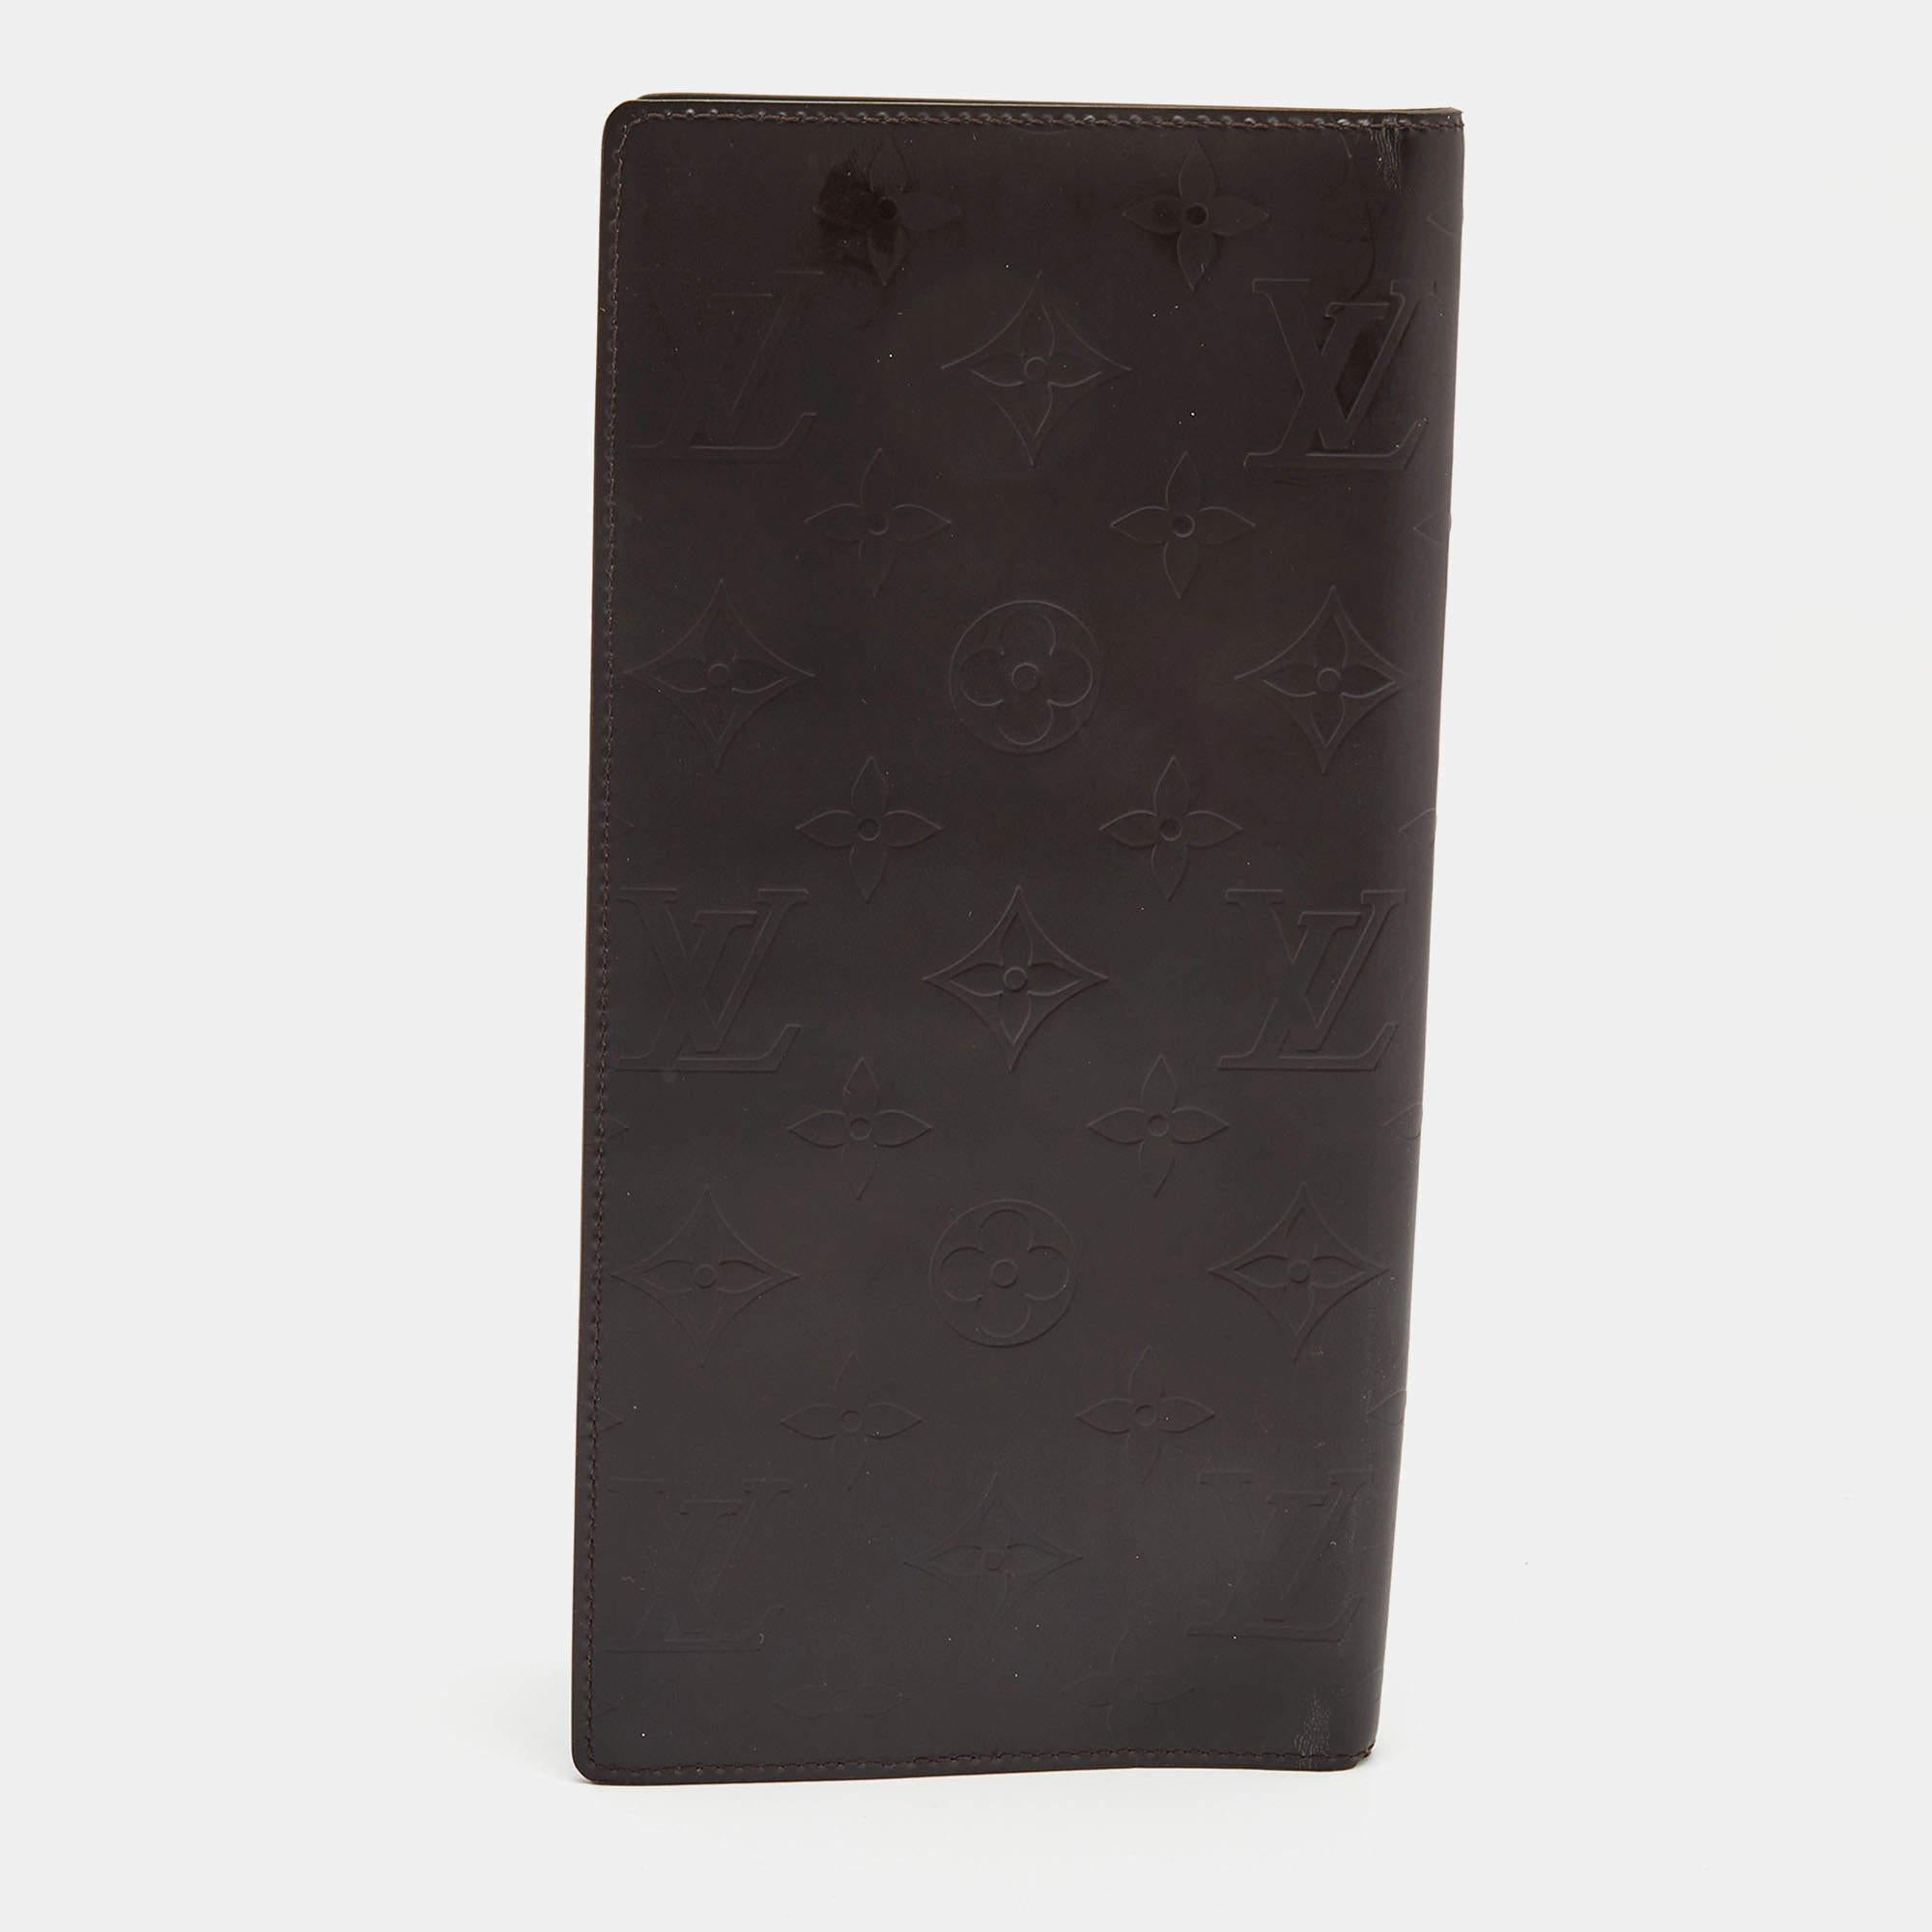 The Louis Vuitton organizer is a luxurious accessory. Crafted from dark brown monogram leather, it features a classic bifold design with multiple card slots, a bill compartment, and an organized interior, making it a stylish and functional essential